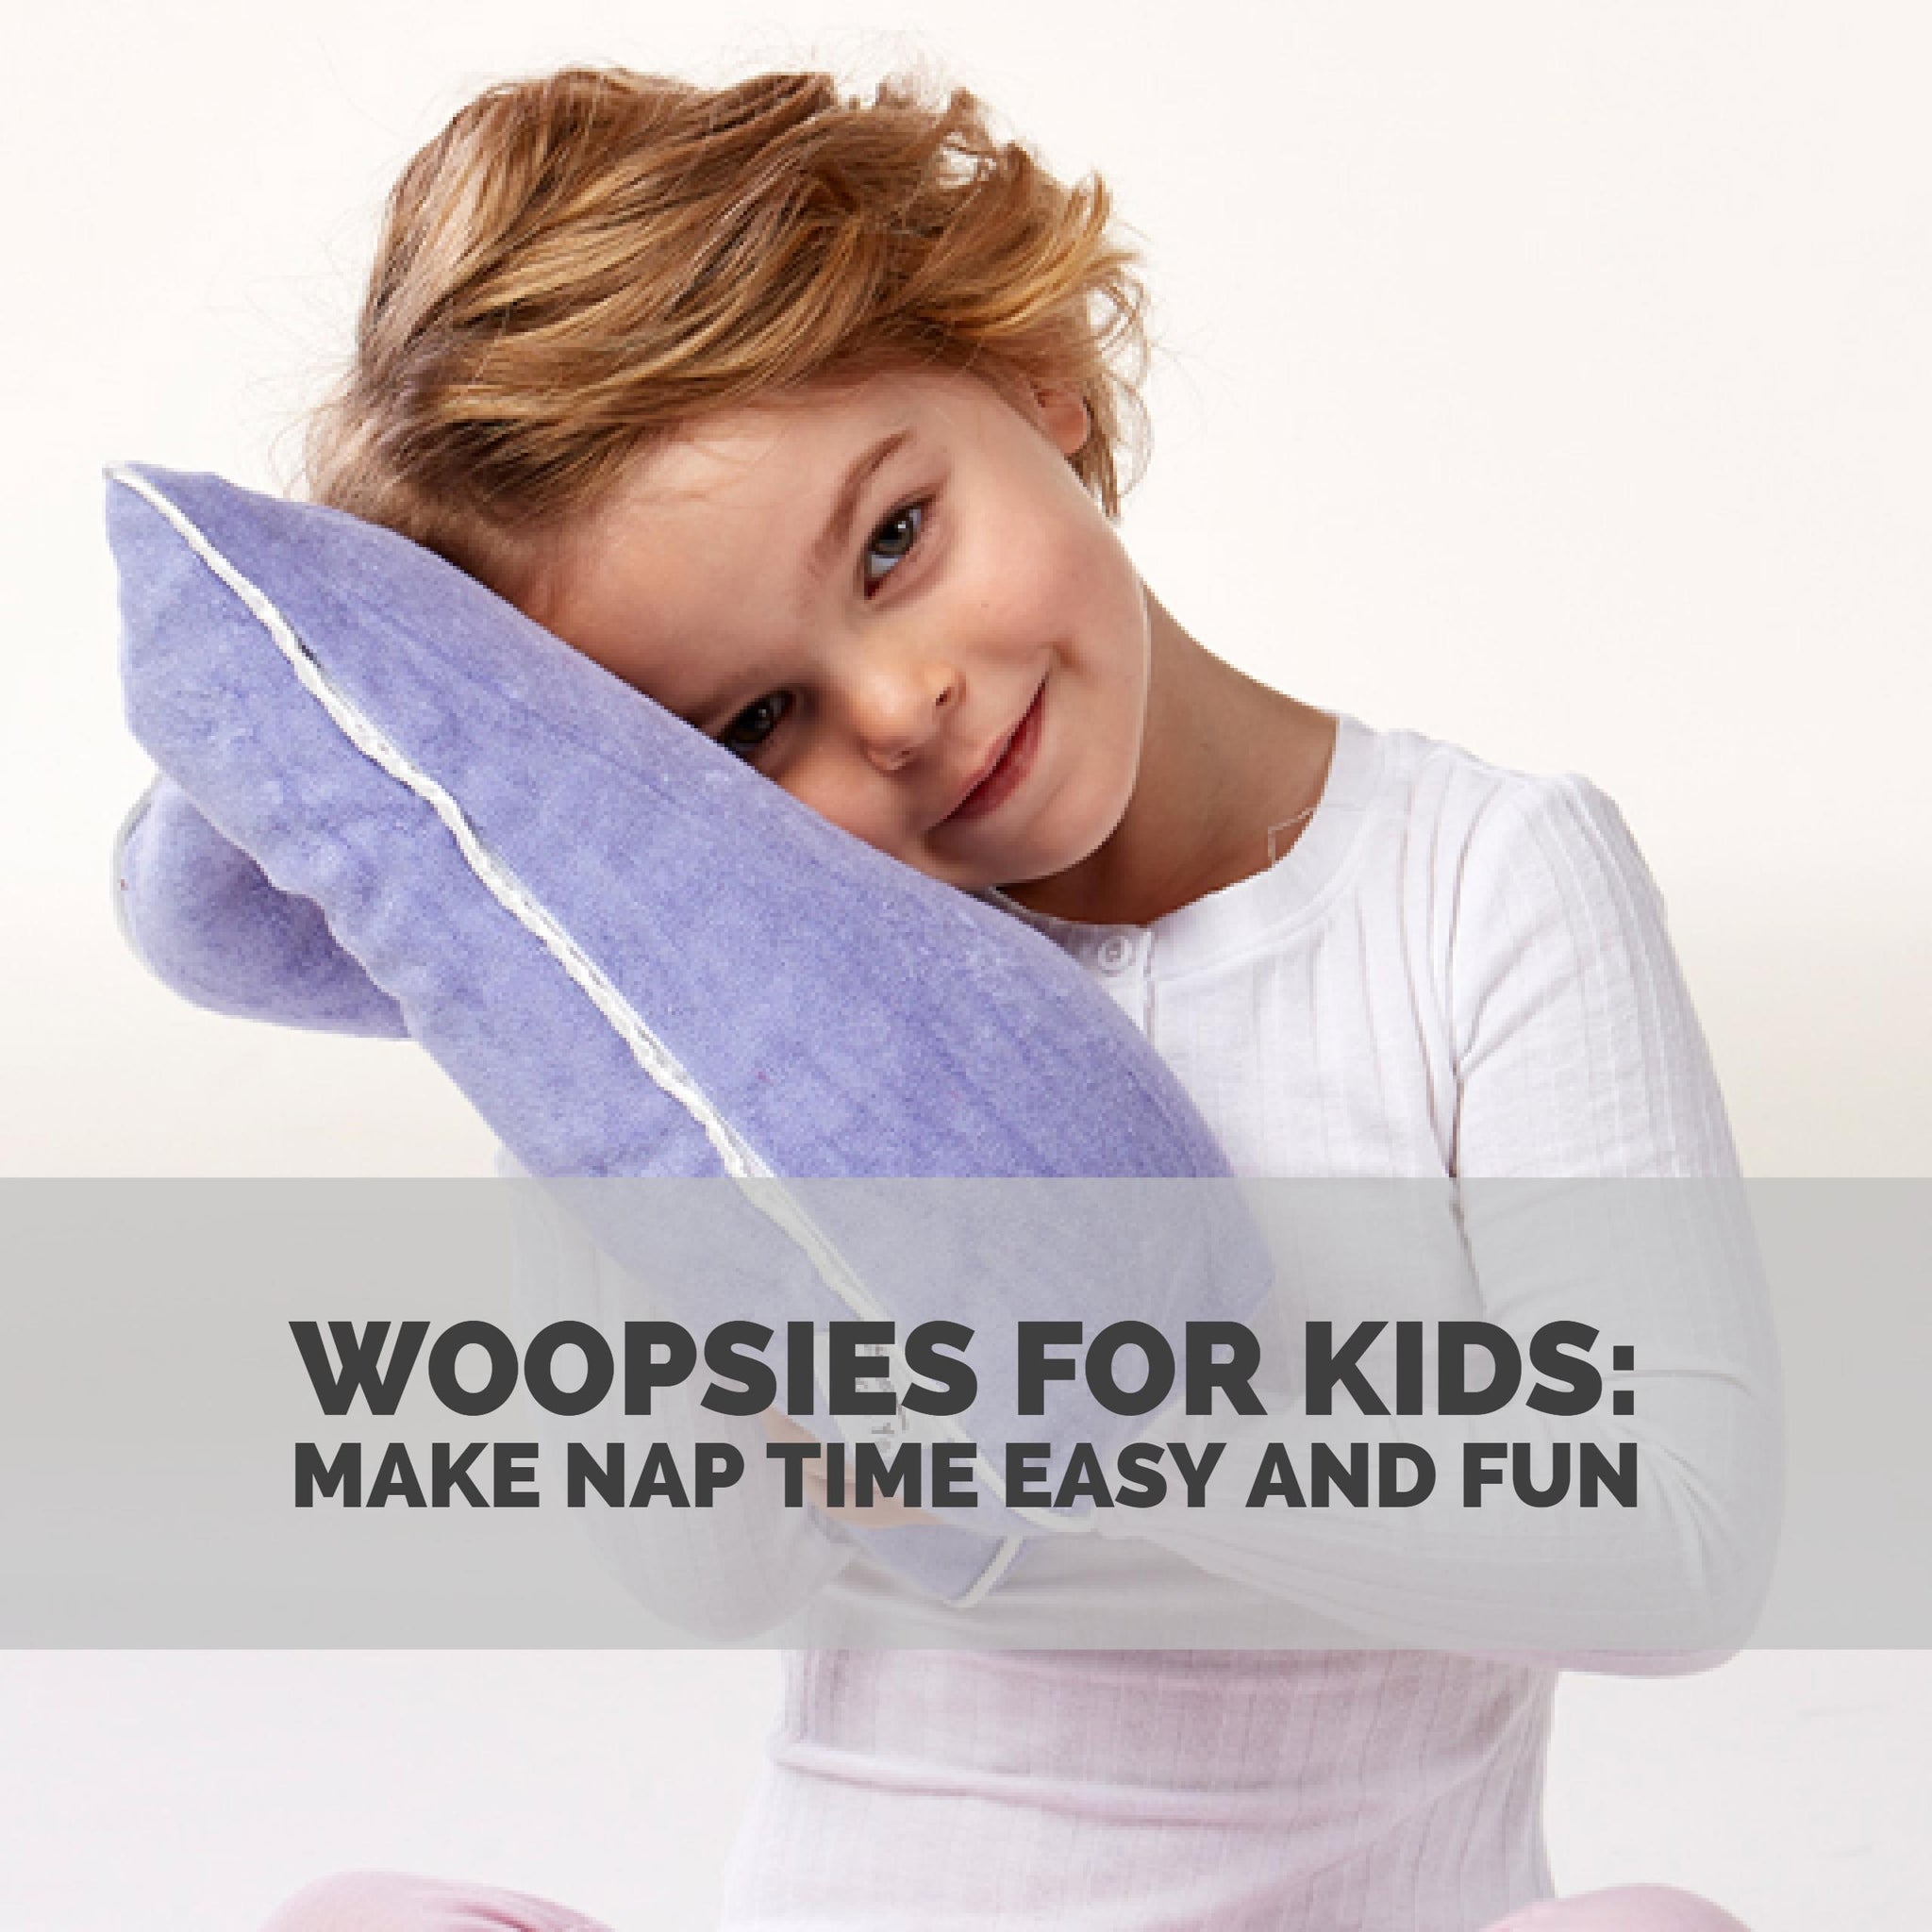 Woopsies for Kids: Make Nap Time Easy and Fun!